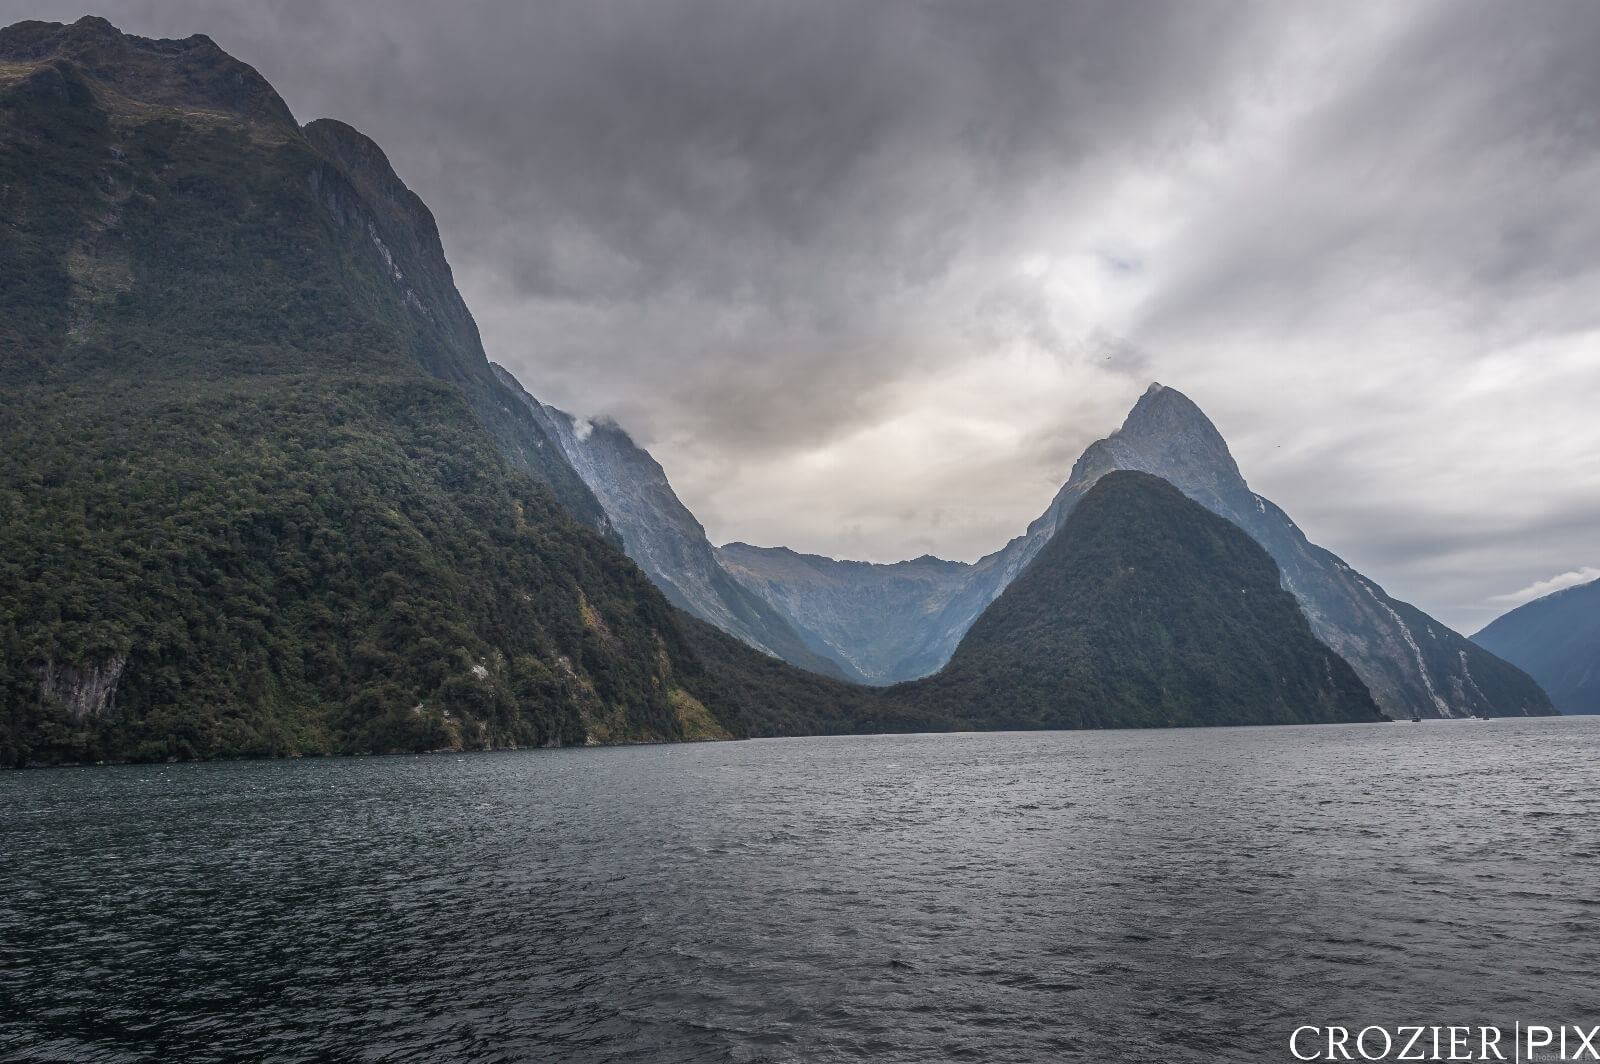 Image of Milford Sound Boat Cruise by Alan Crozier